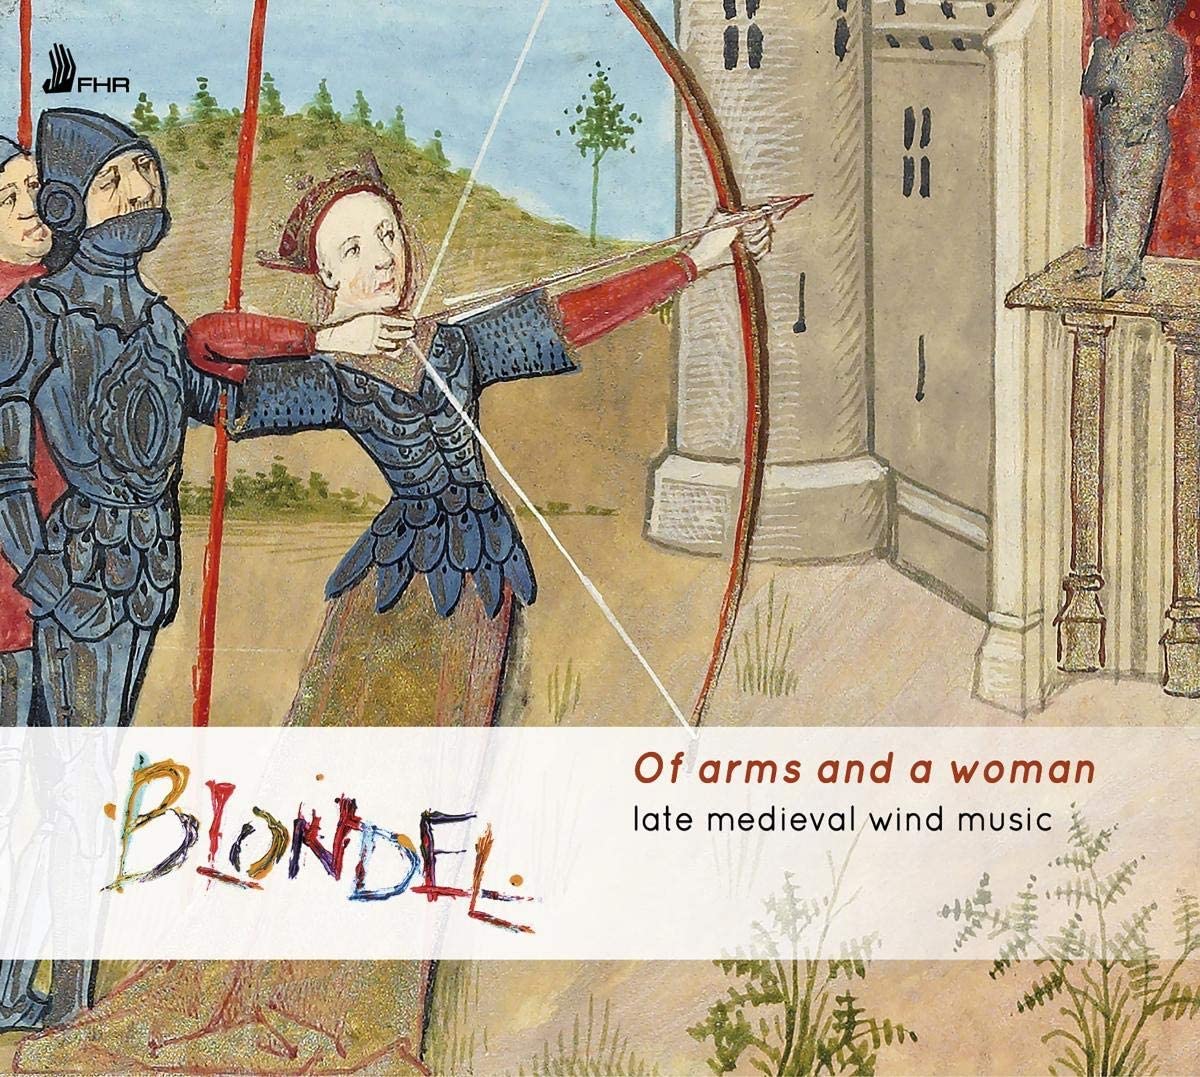 Cover of the CD Blondel Of arms and a woman